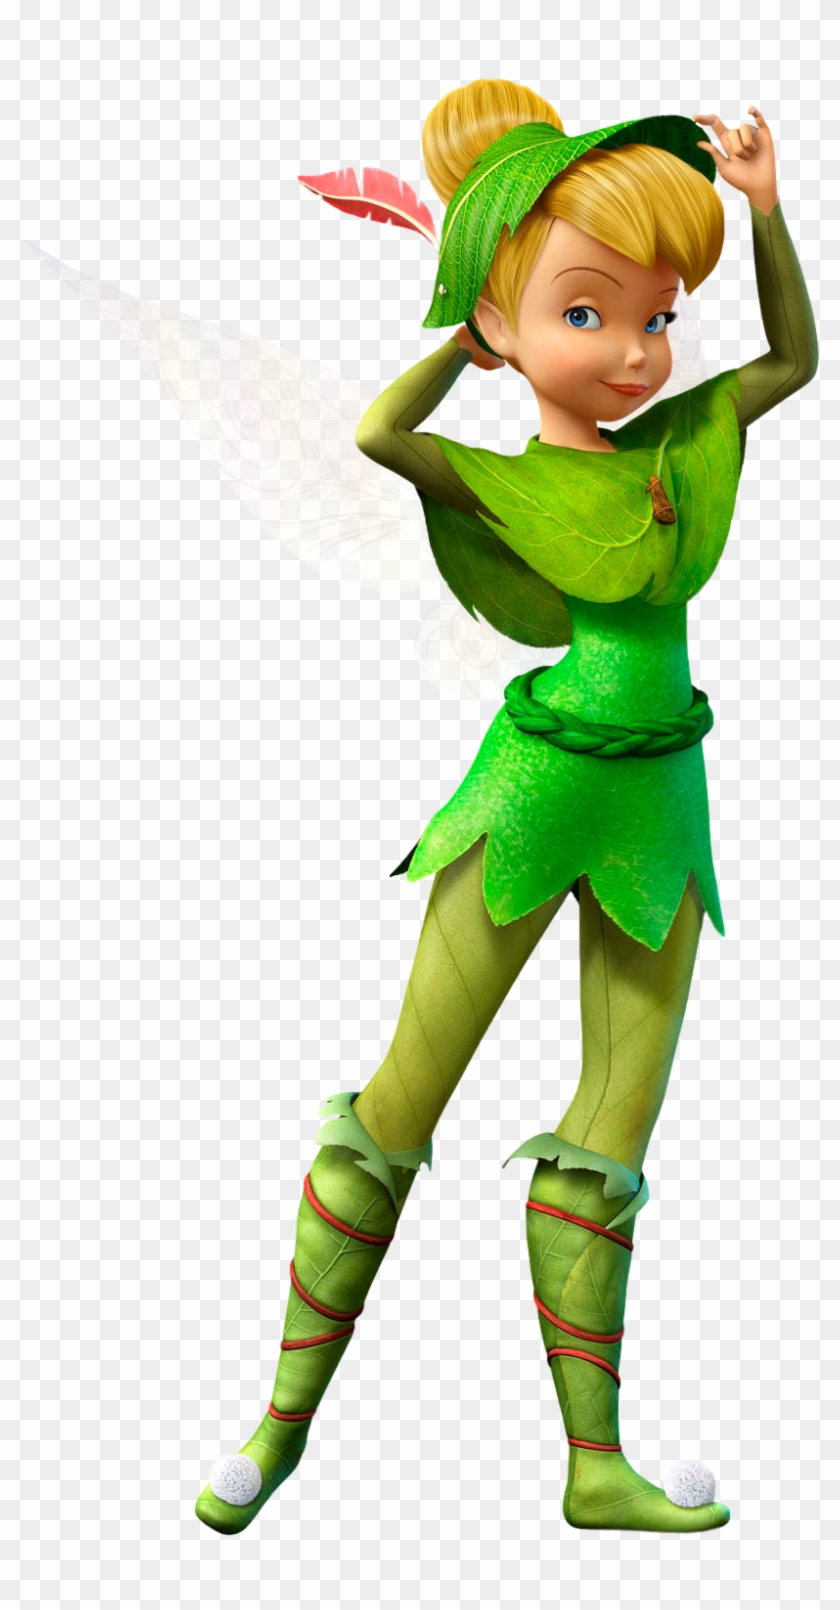 Transparent Tinkerbell Fairy Png Clipartu200b Gallery - Tinkerbell And The Lost Treasure #877801